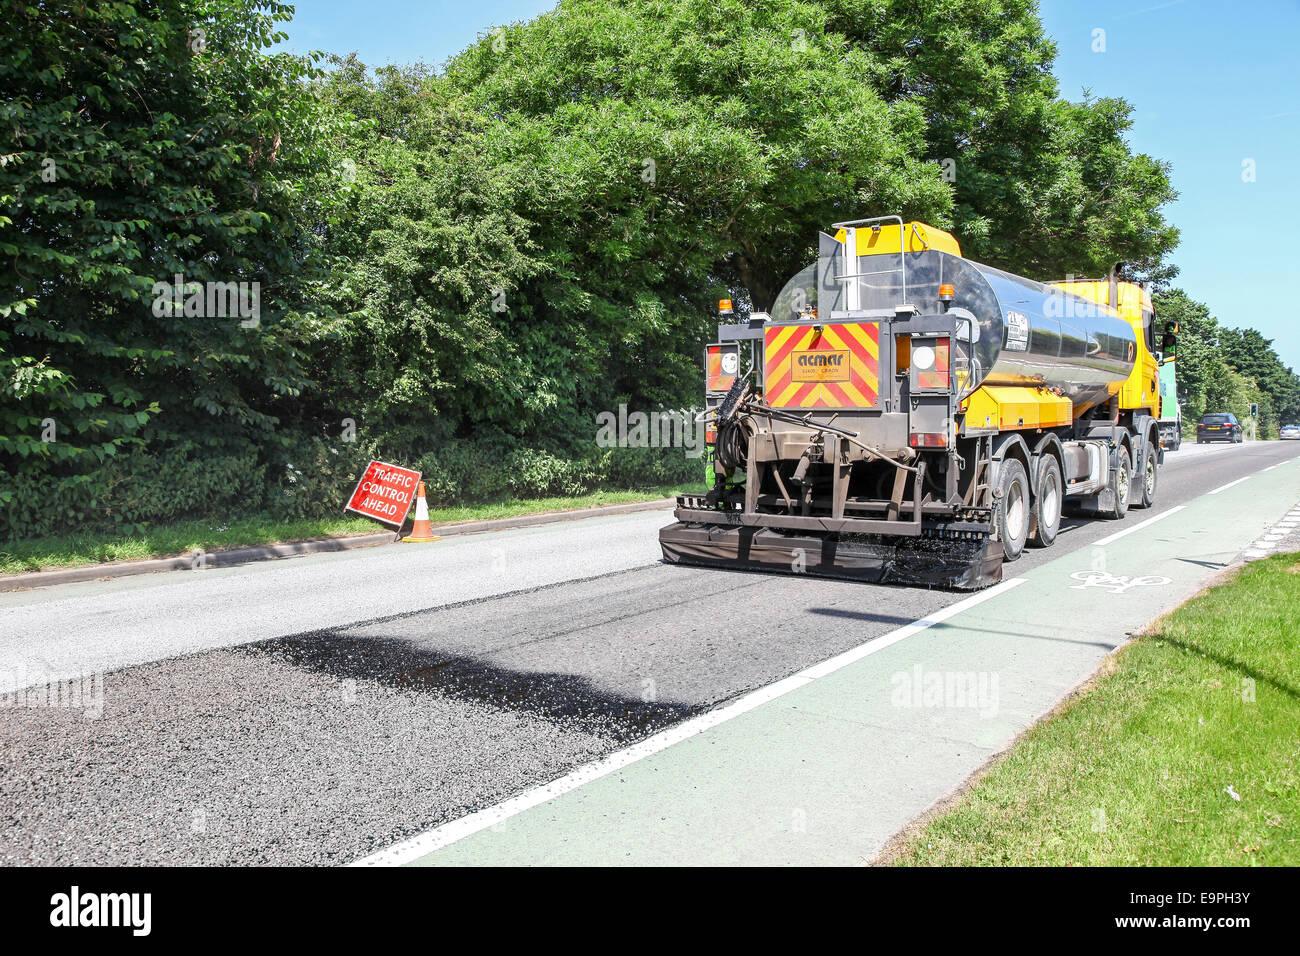 A lorry or truck tarmacing or laying tarmac on a main road Stoke-on-Trent, Staffordshire, England, UK Stock Photo